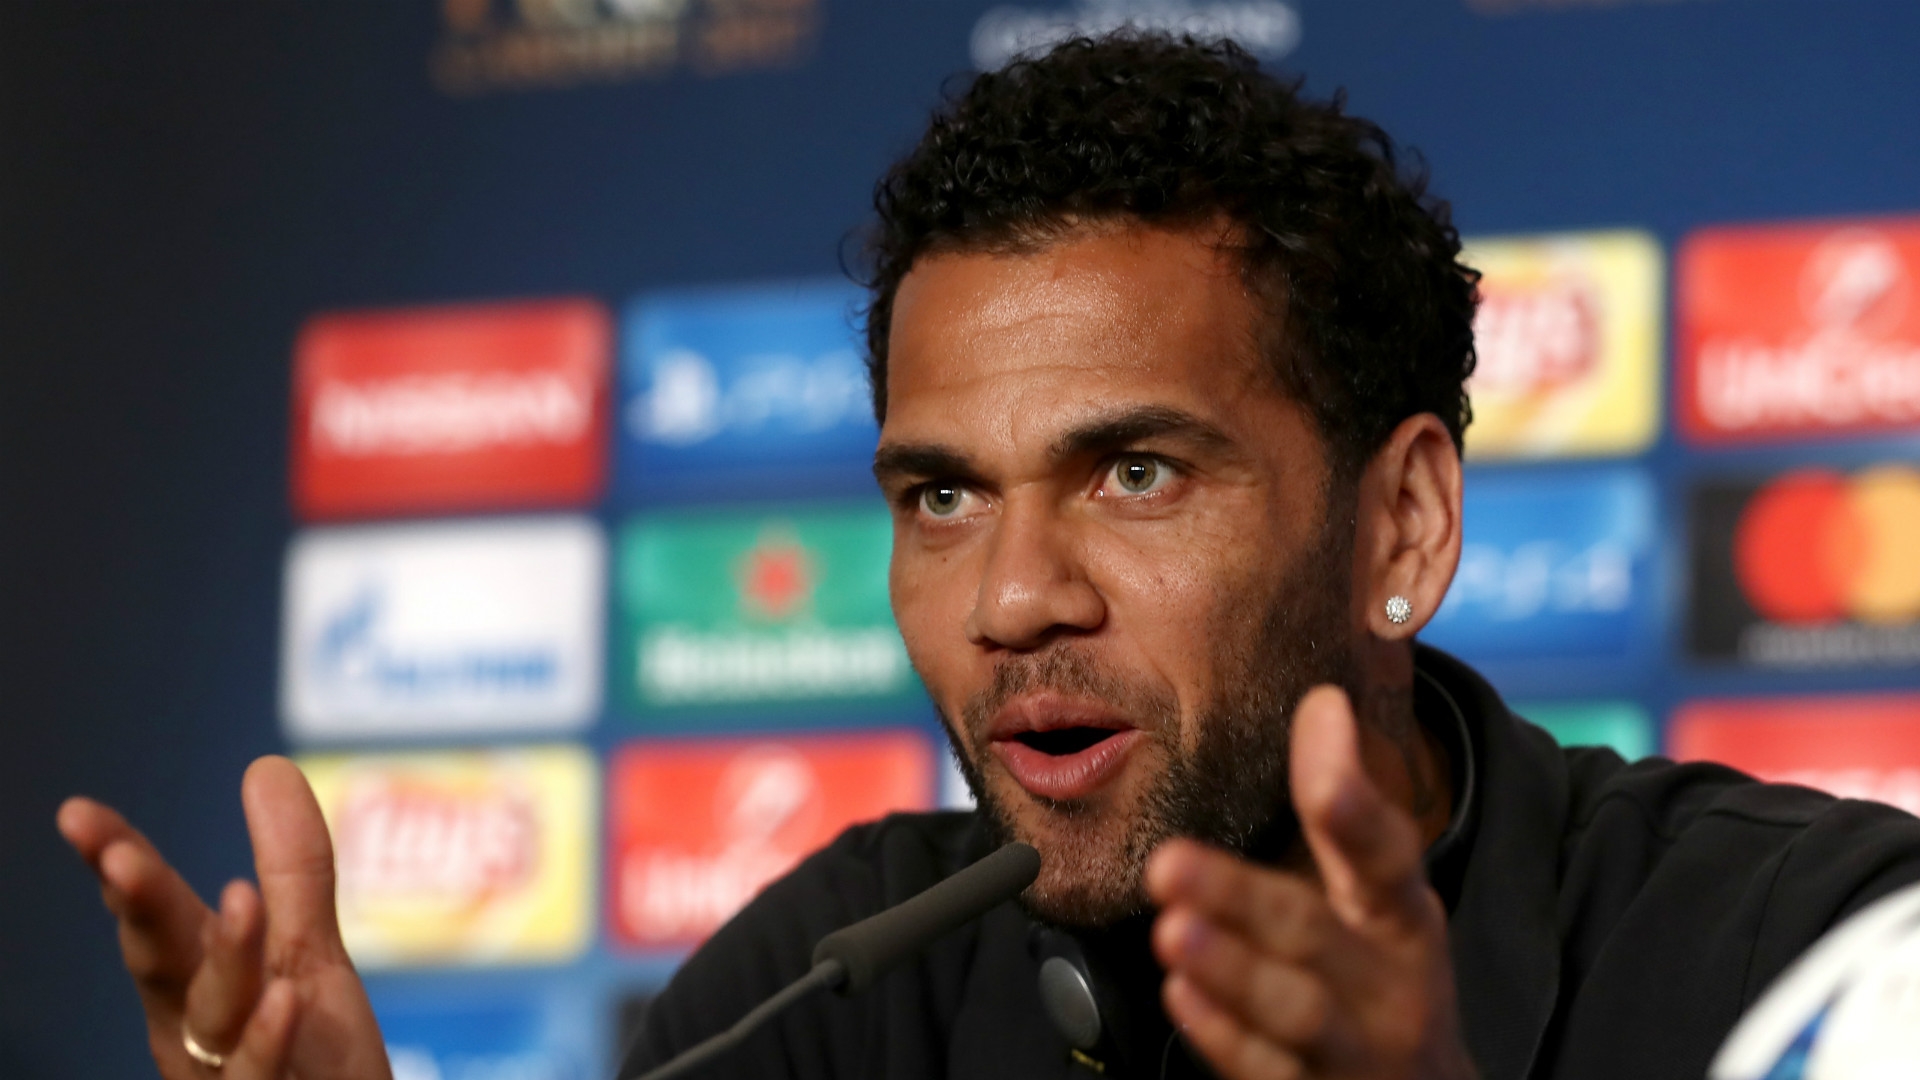 Barcelona have been trying to replace Dani Alves for at least a year now. Even before the Brazilian right-back had left the team, Barca were said to be making inquiries about someone equipped to fill his shoes.